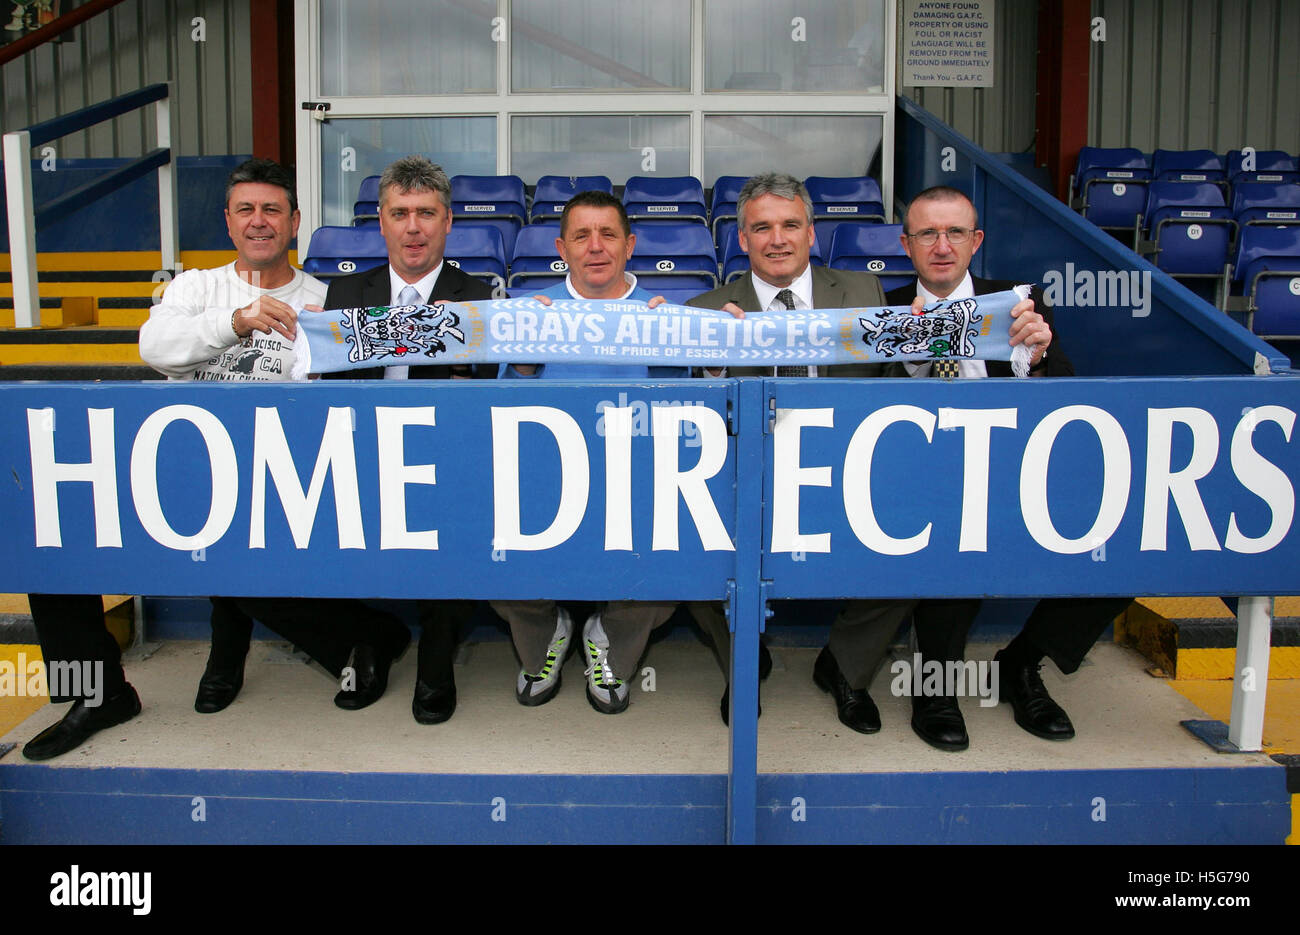 From L to R - Will Wordsworth (Commercial Director), Gerry Murphy (Assistant Manager), Mick Woodward (Chairman), Frank Gray (Manager) and Steve Snelling (Physio) - Grays Athletic Football Club - 25/05/06 Stock Photo